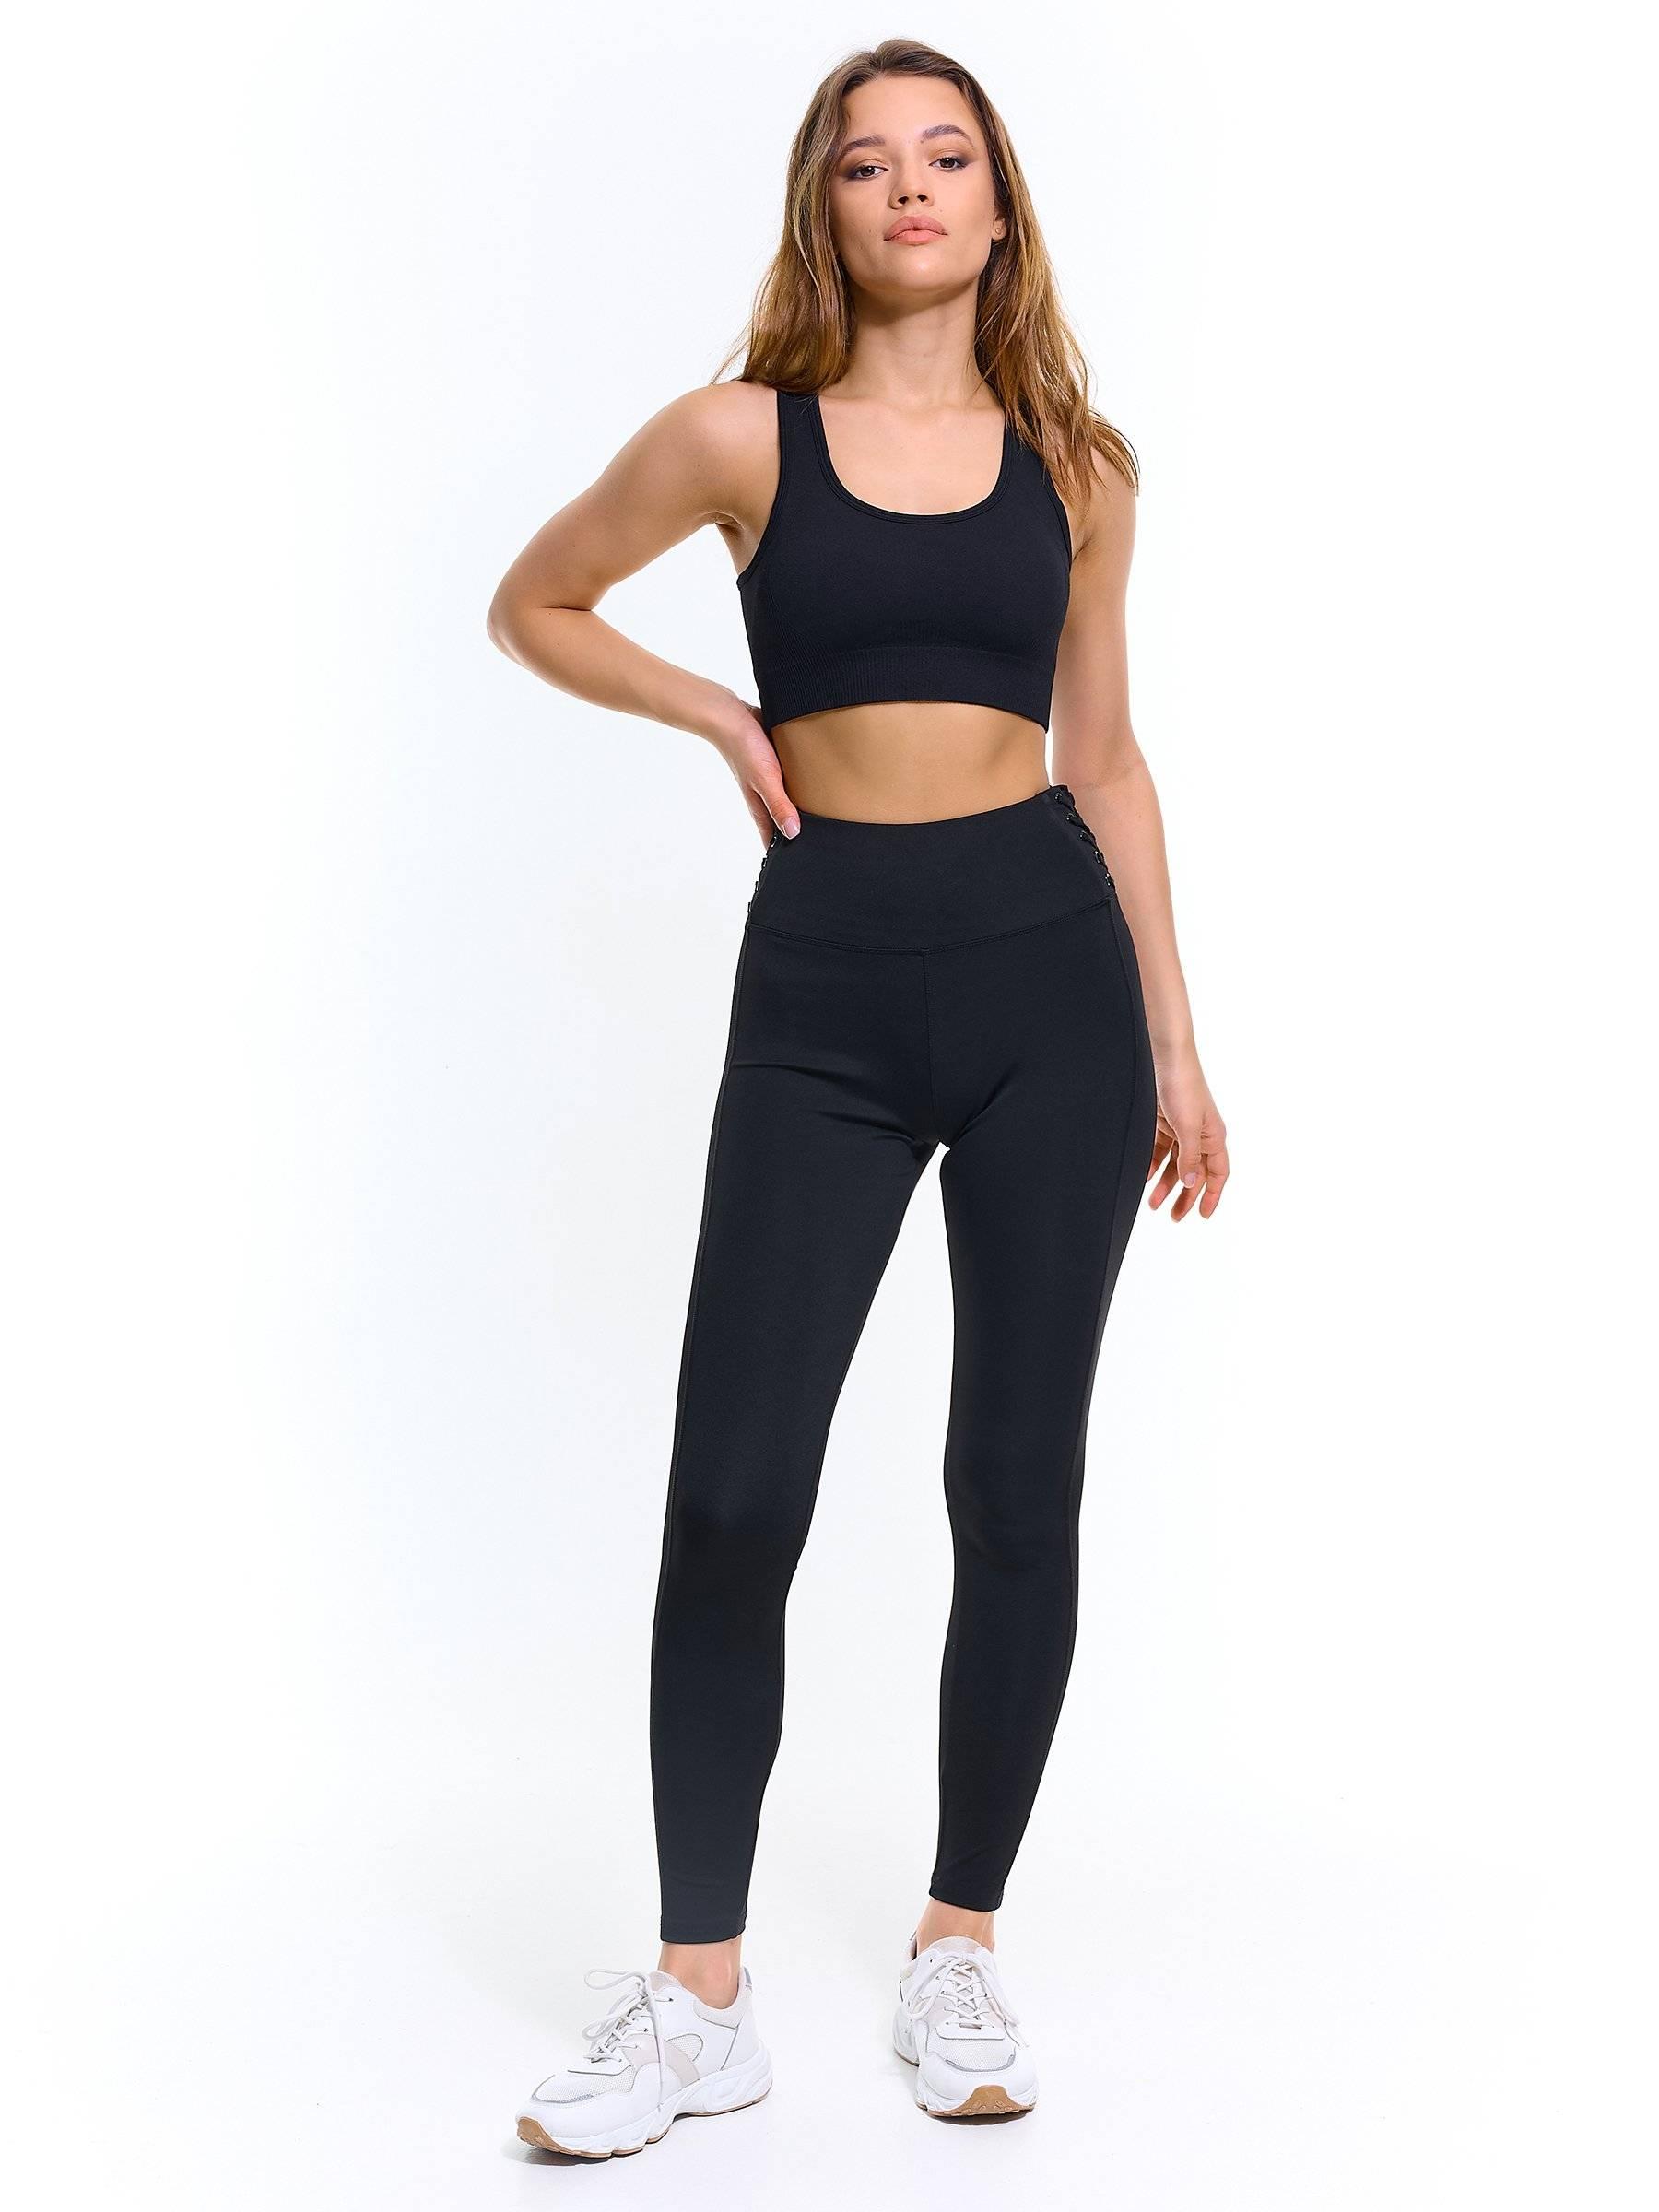 Pants | Womens GATE Sports leggings with lacing detail Black